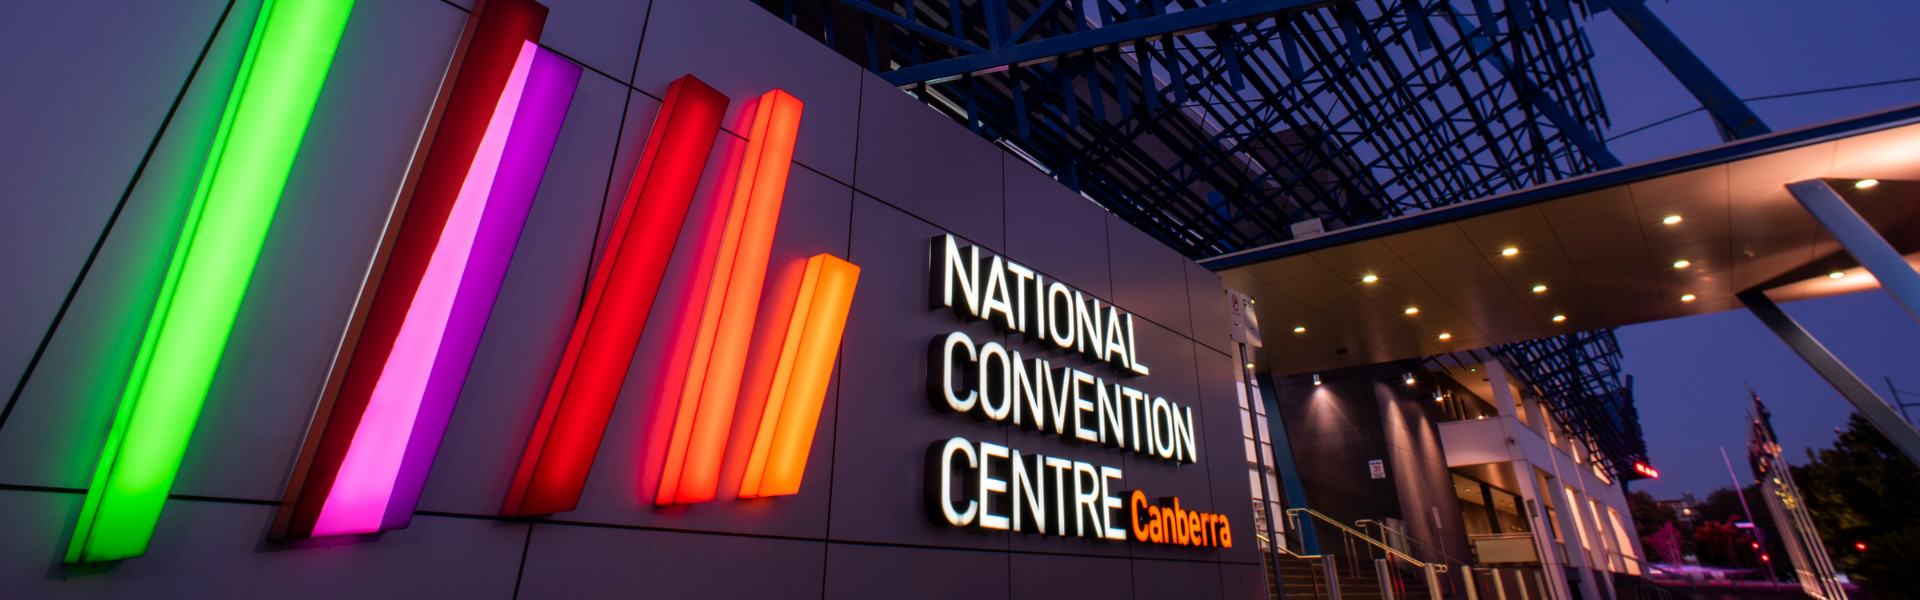 national-convention-centre-canberra